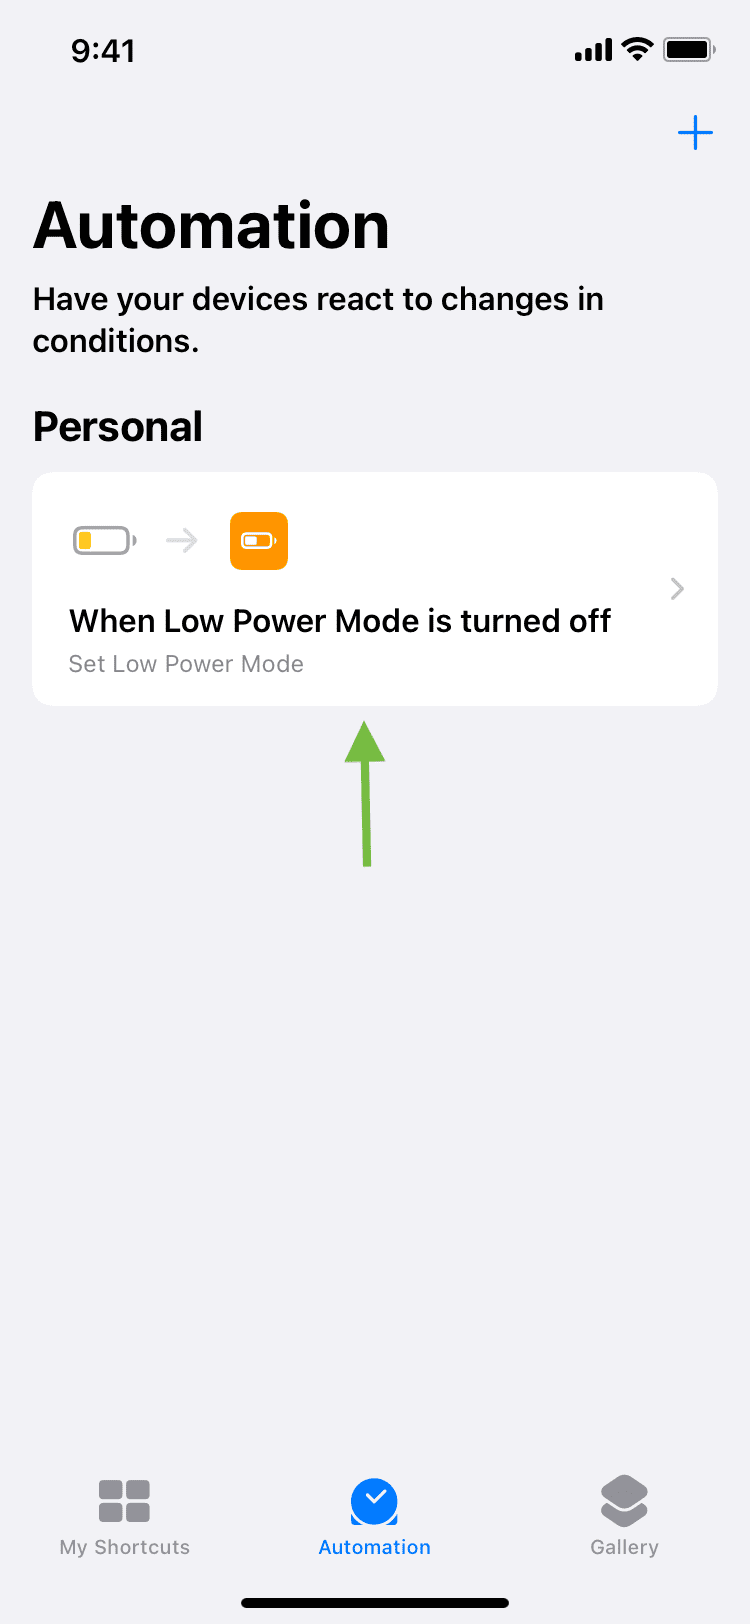 When Low Power Mode is turned off automation on iPhone